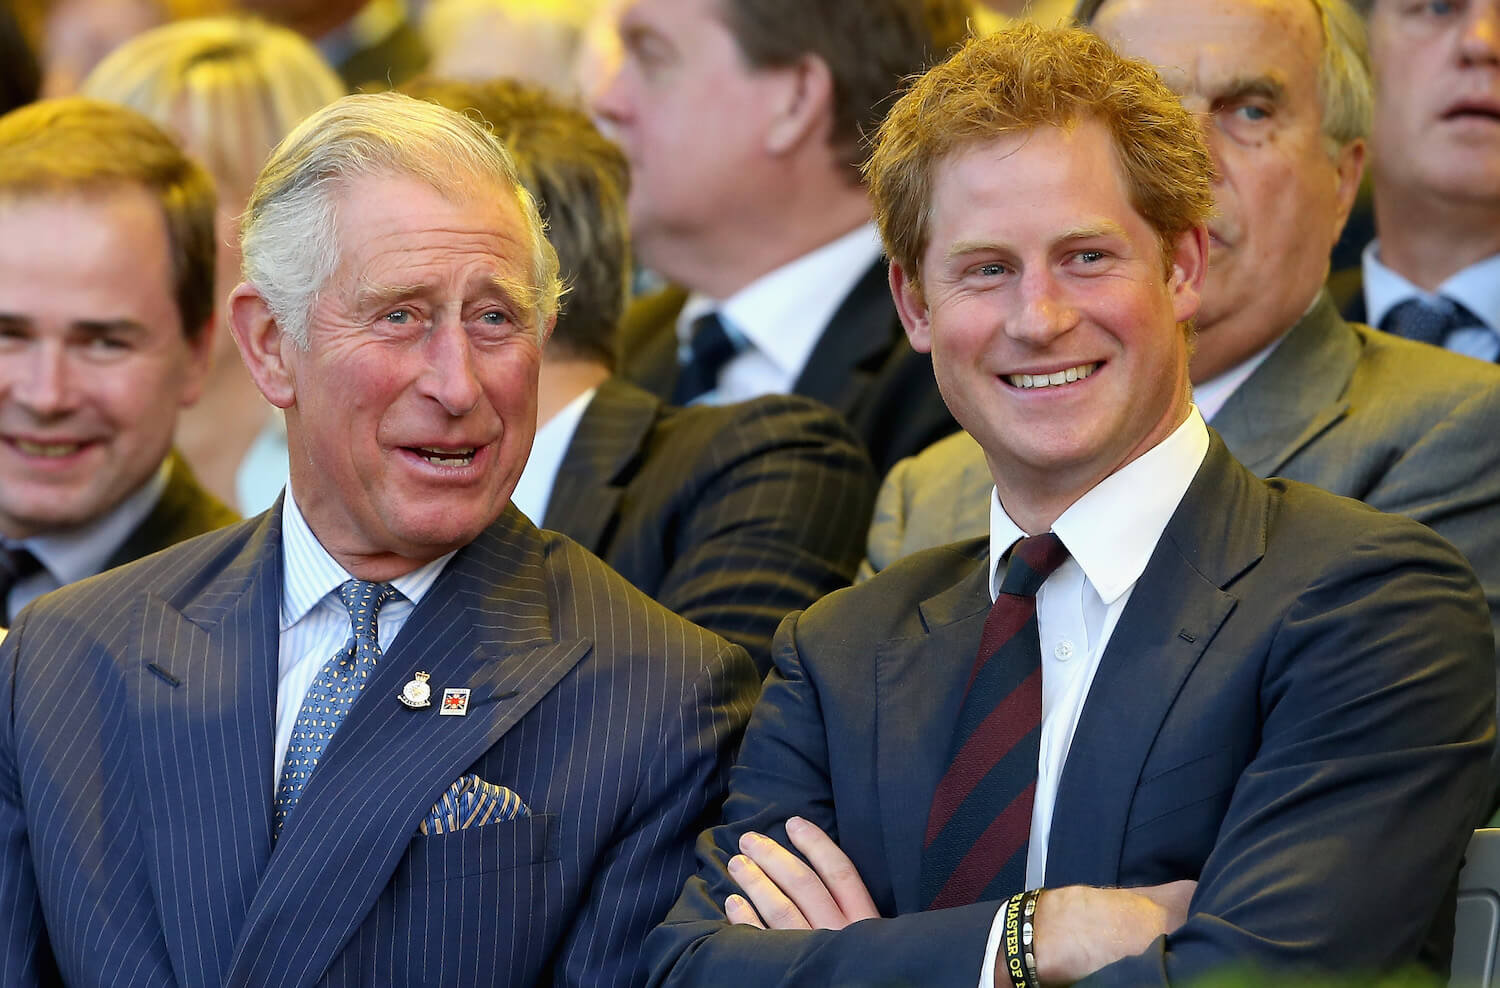 King Charles III and Prince Harry sitting next to each other and talking while smiling